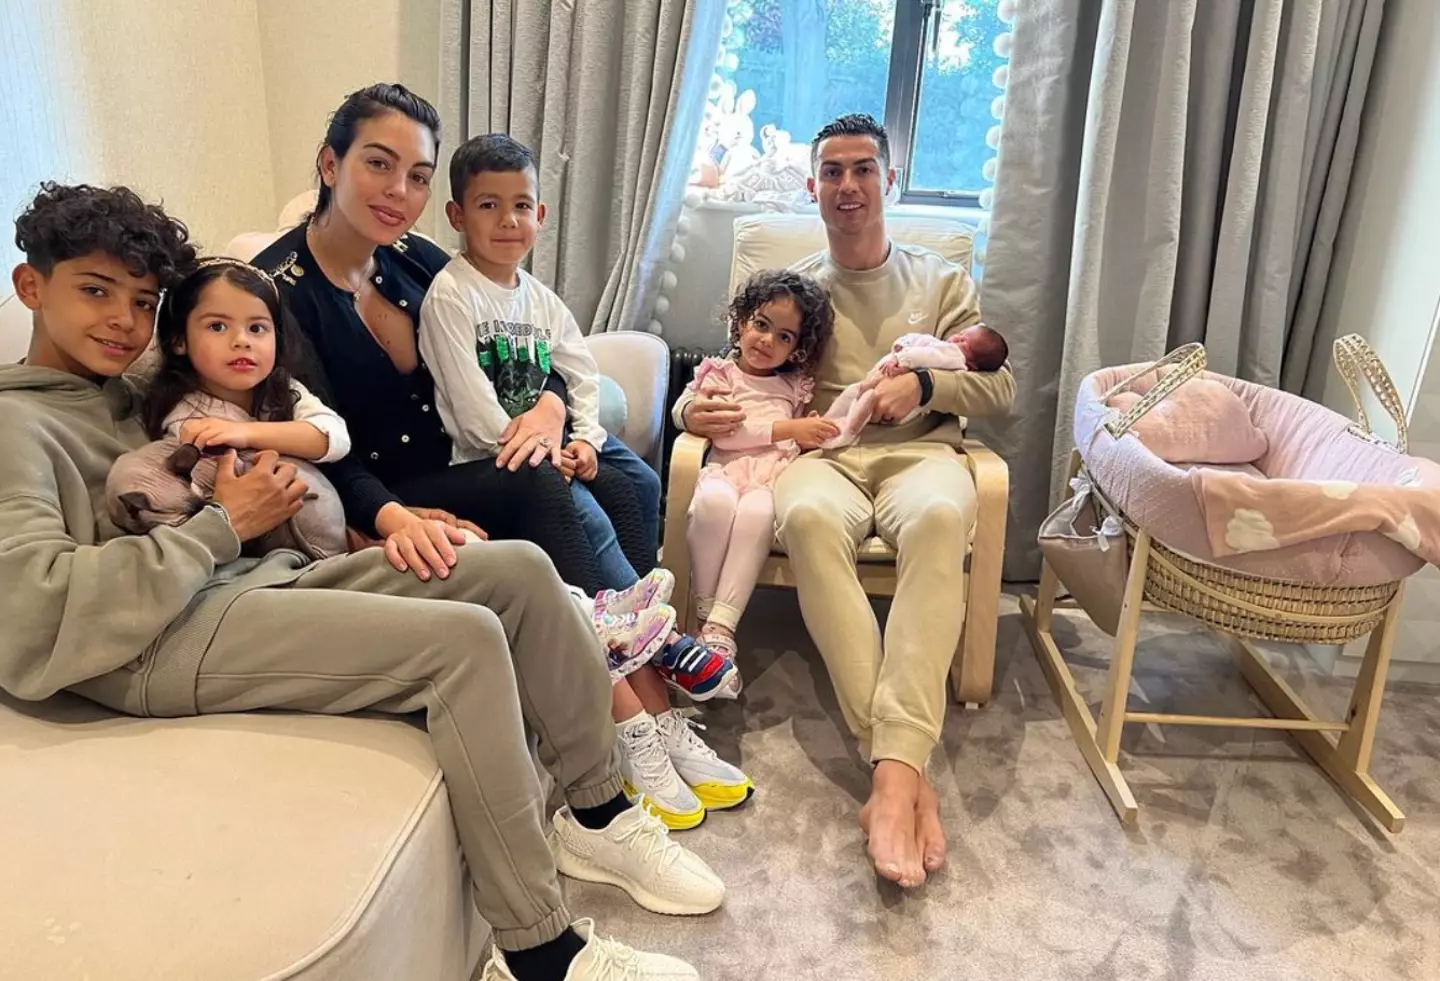 Earlier this week, fans were shocked and saddened to hear that Cristiano Ronaldo and Georgina Rodriguez had tragically lost their baby boy after welcoming his twin sister (